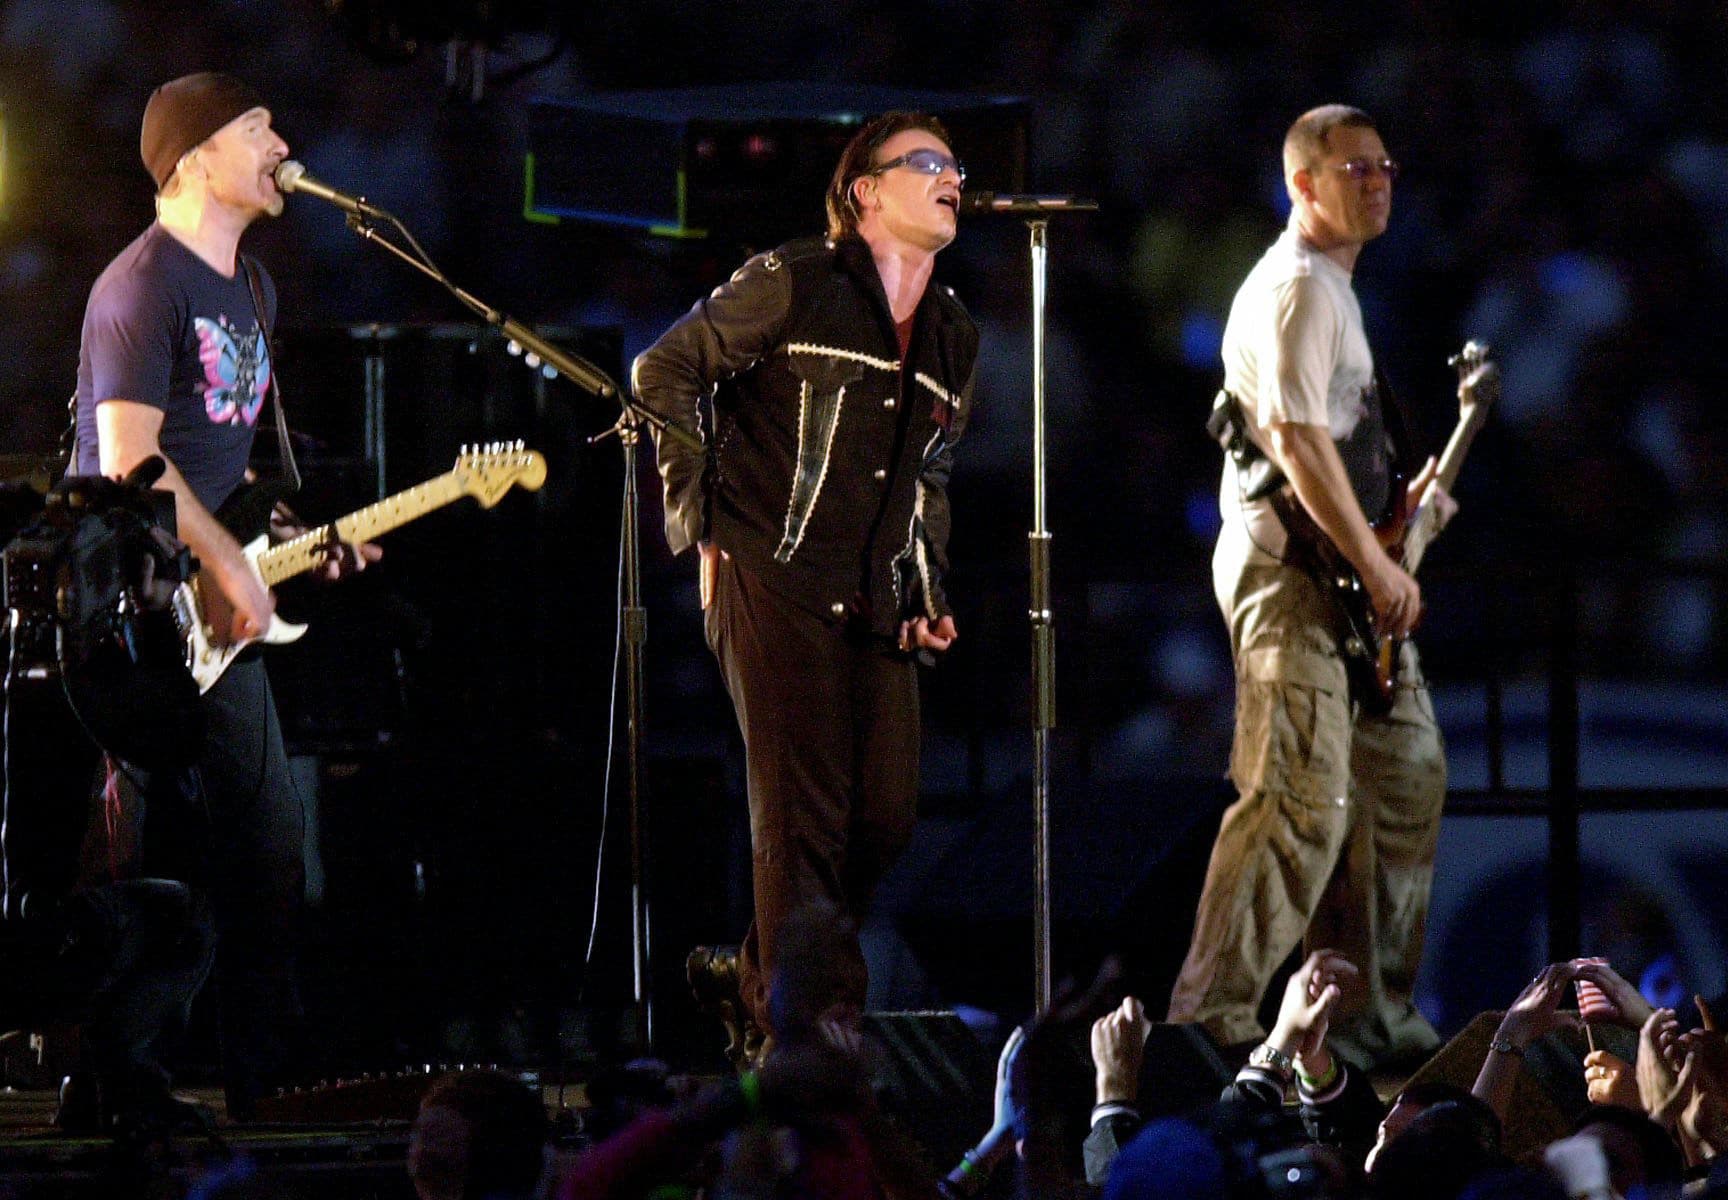 FILE - In this Feb. 3, 2002 file photo, The Edge, from left, Bono and Adam Clayton, of U2, perform during the halftime show of Super Bowl XXXVI at the Louisiana Superdome in New Orleans. At the first Super Bowl following the 2001 terrorist attacks, U2 performed "Where the Streets Have No Name" as a giant scrim behind them unfurled names of the Sept. 11 victims. (AP Photo/Tony Gutierrez, File)